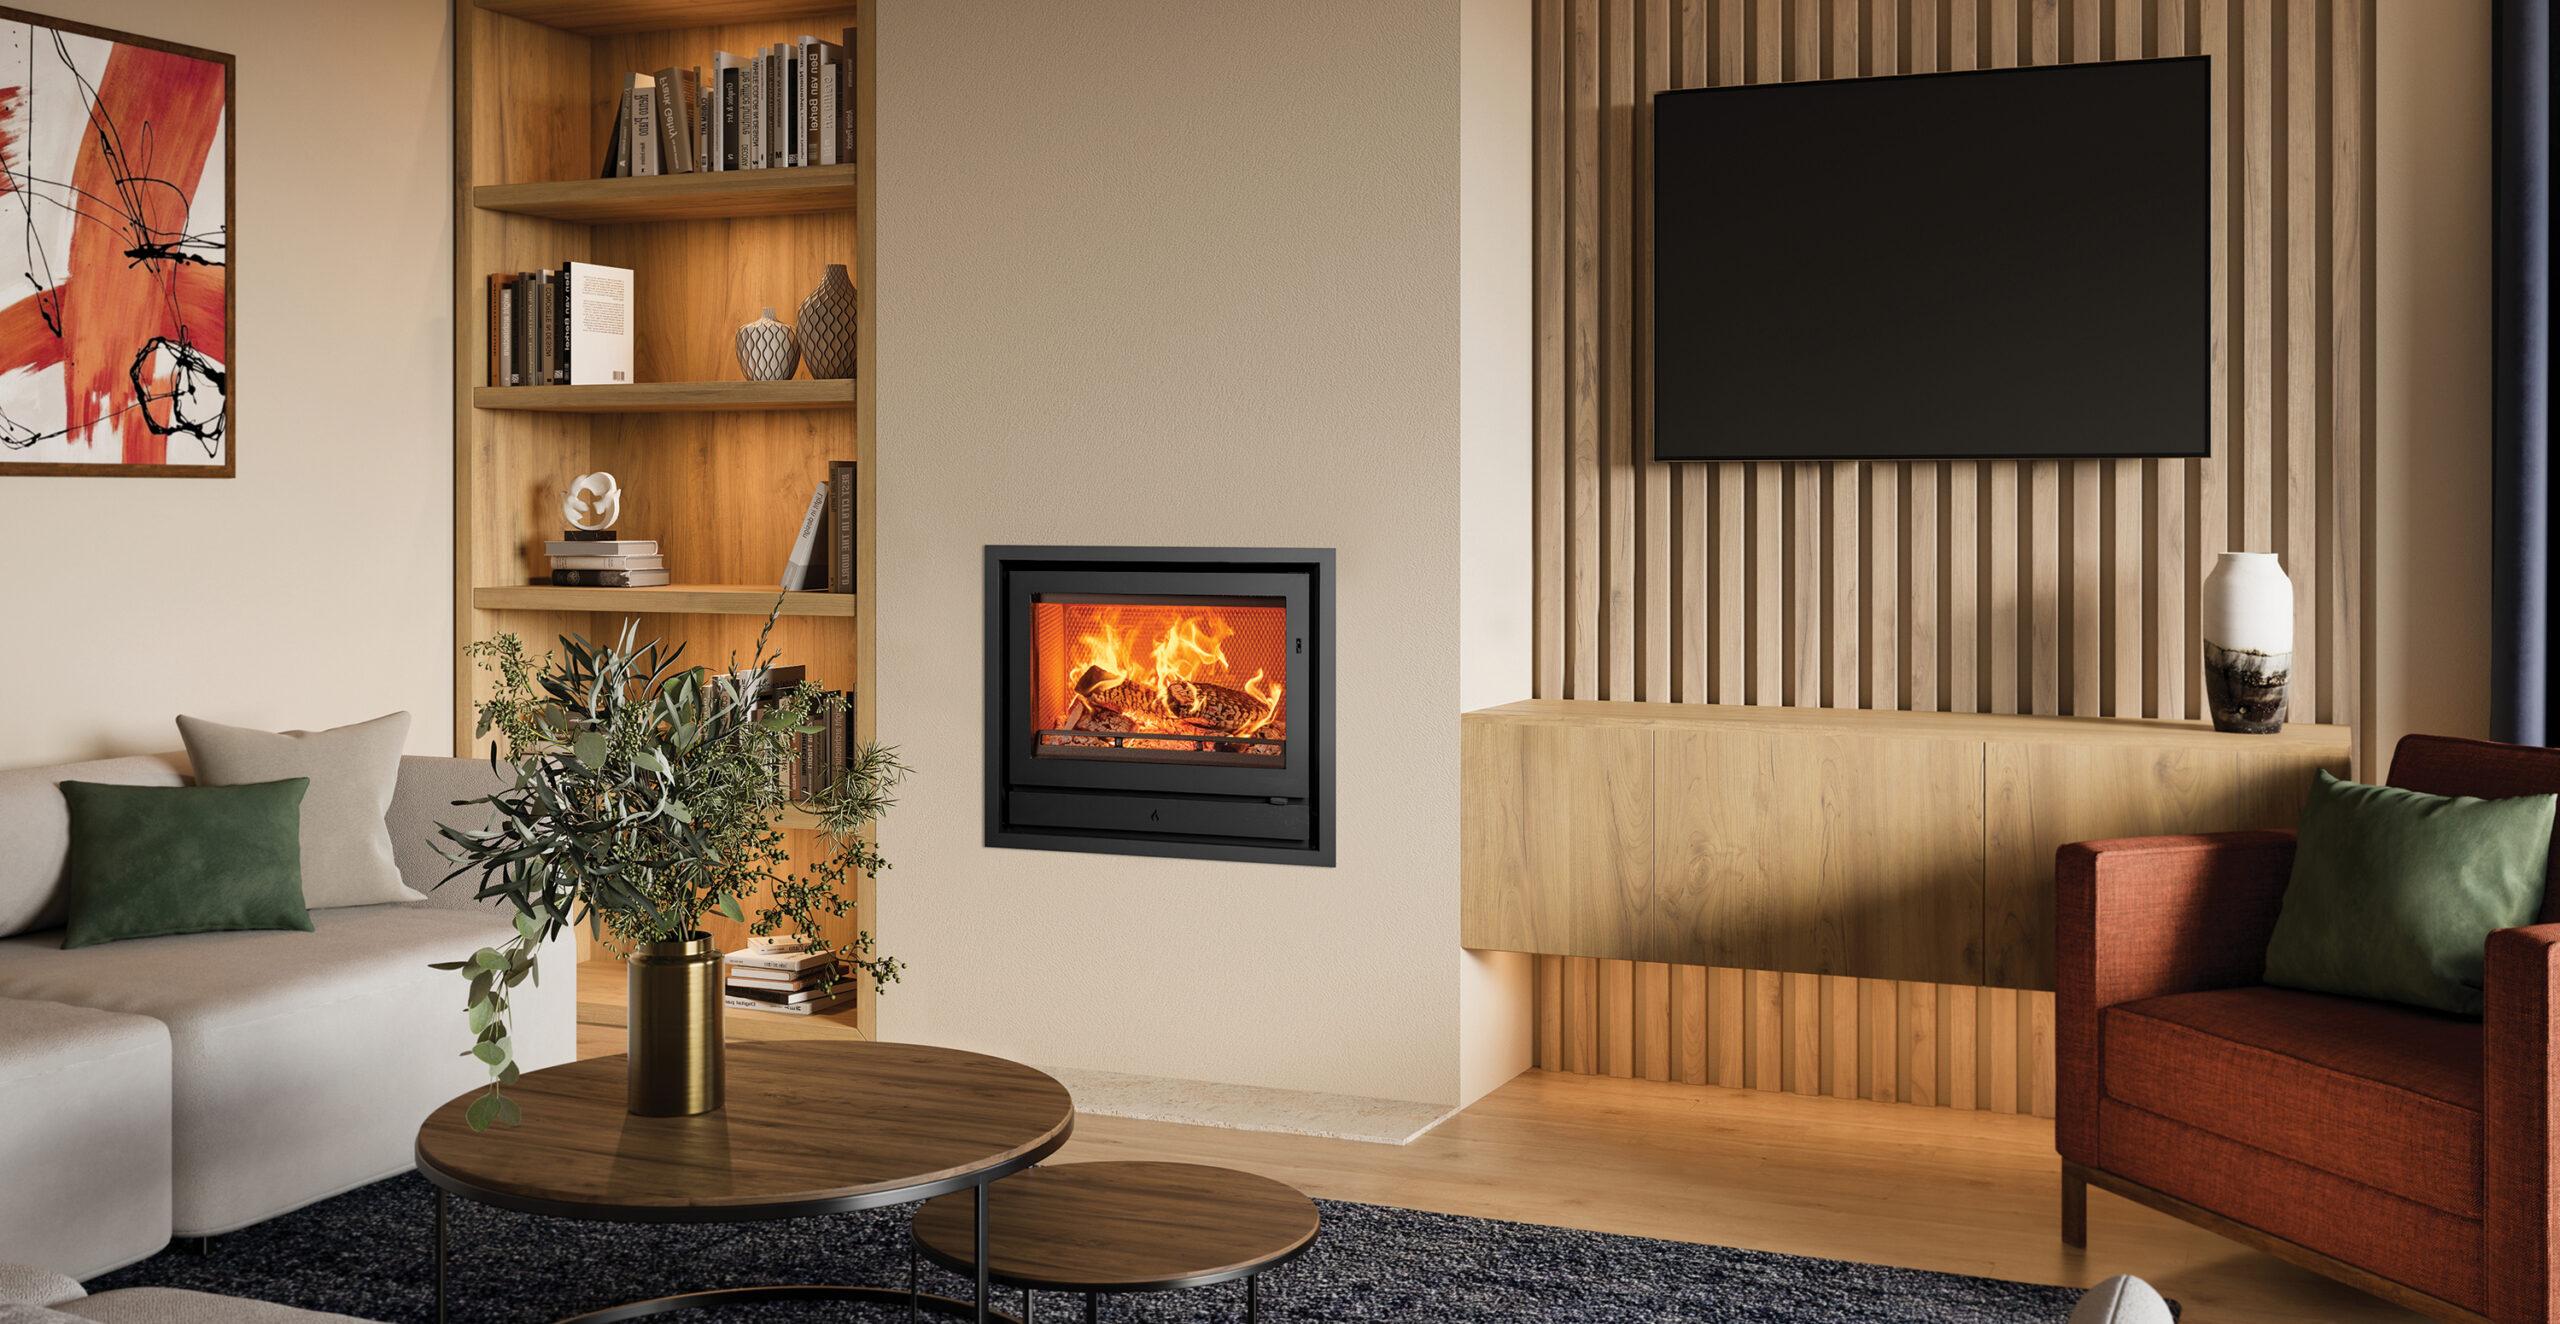 Stovax Riva2 66 woodburner. Modern fireplace with slat wood accent wall.